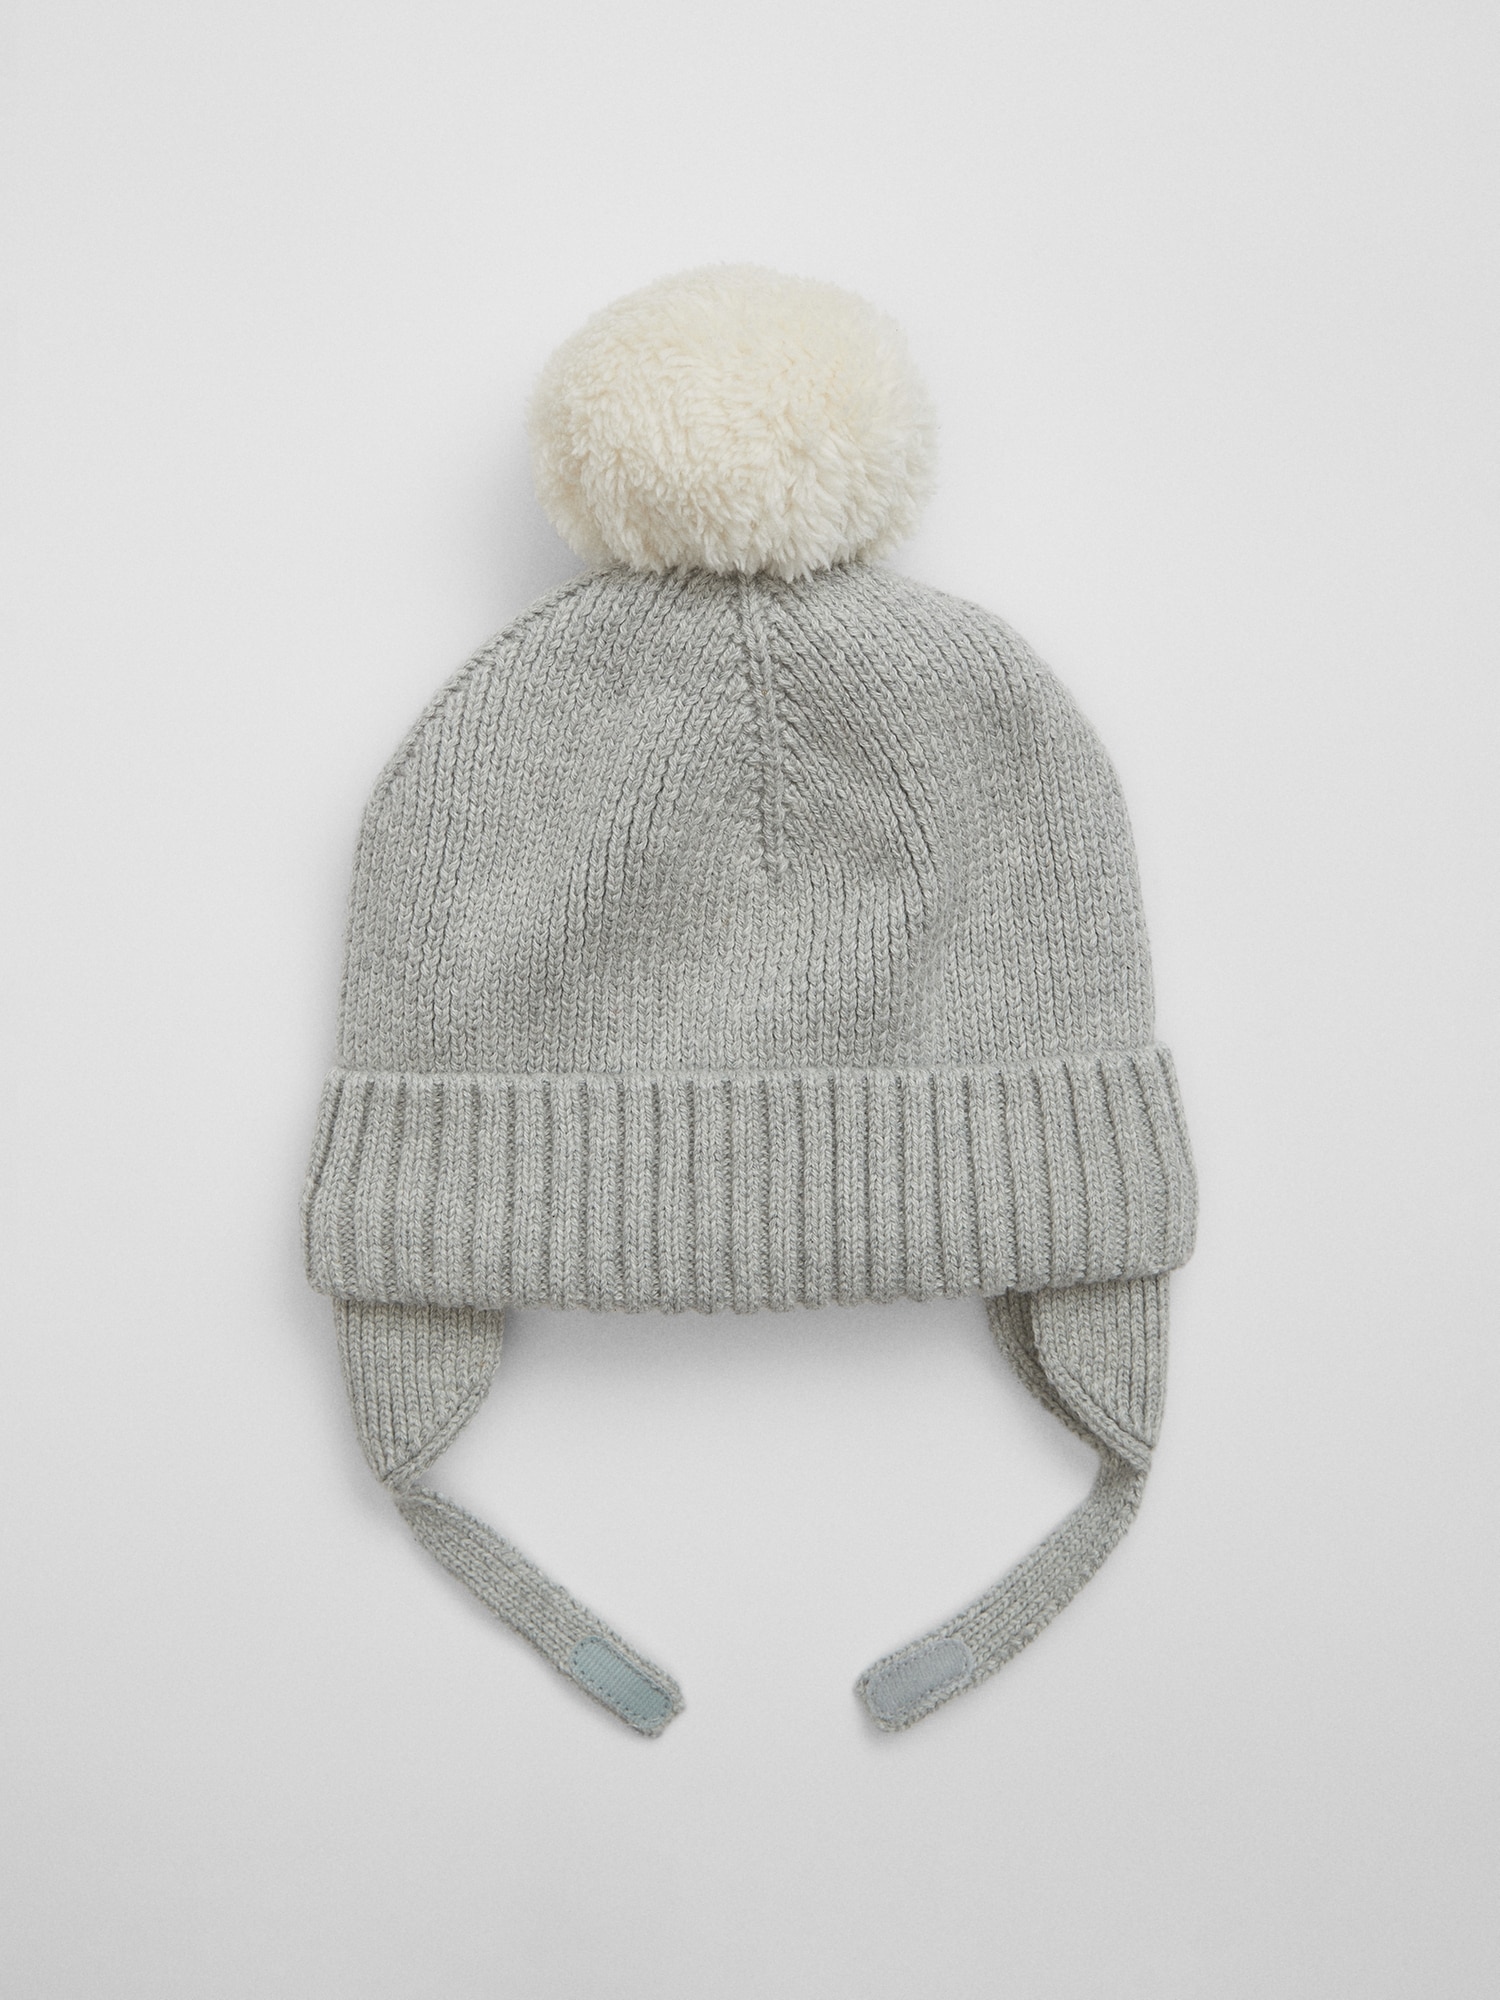 Baby Sherpa-Lined Poof Beanie